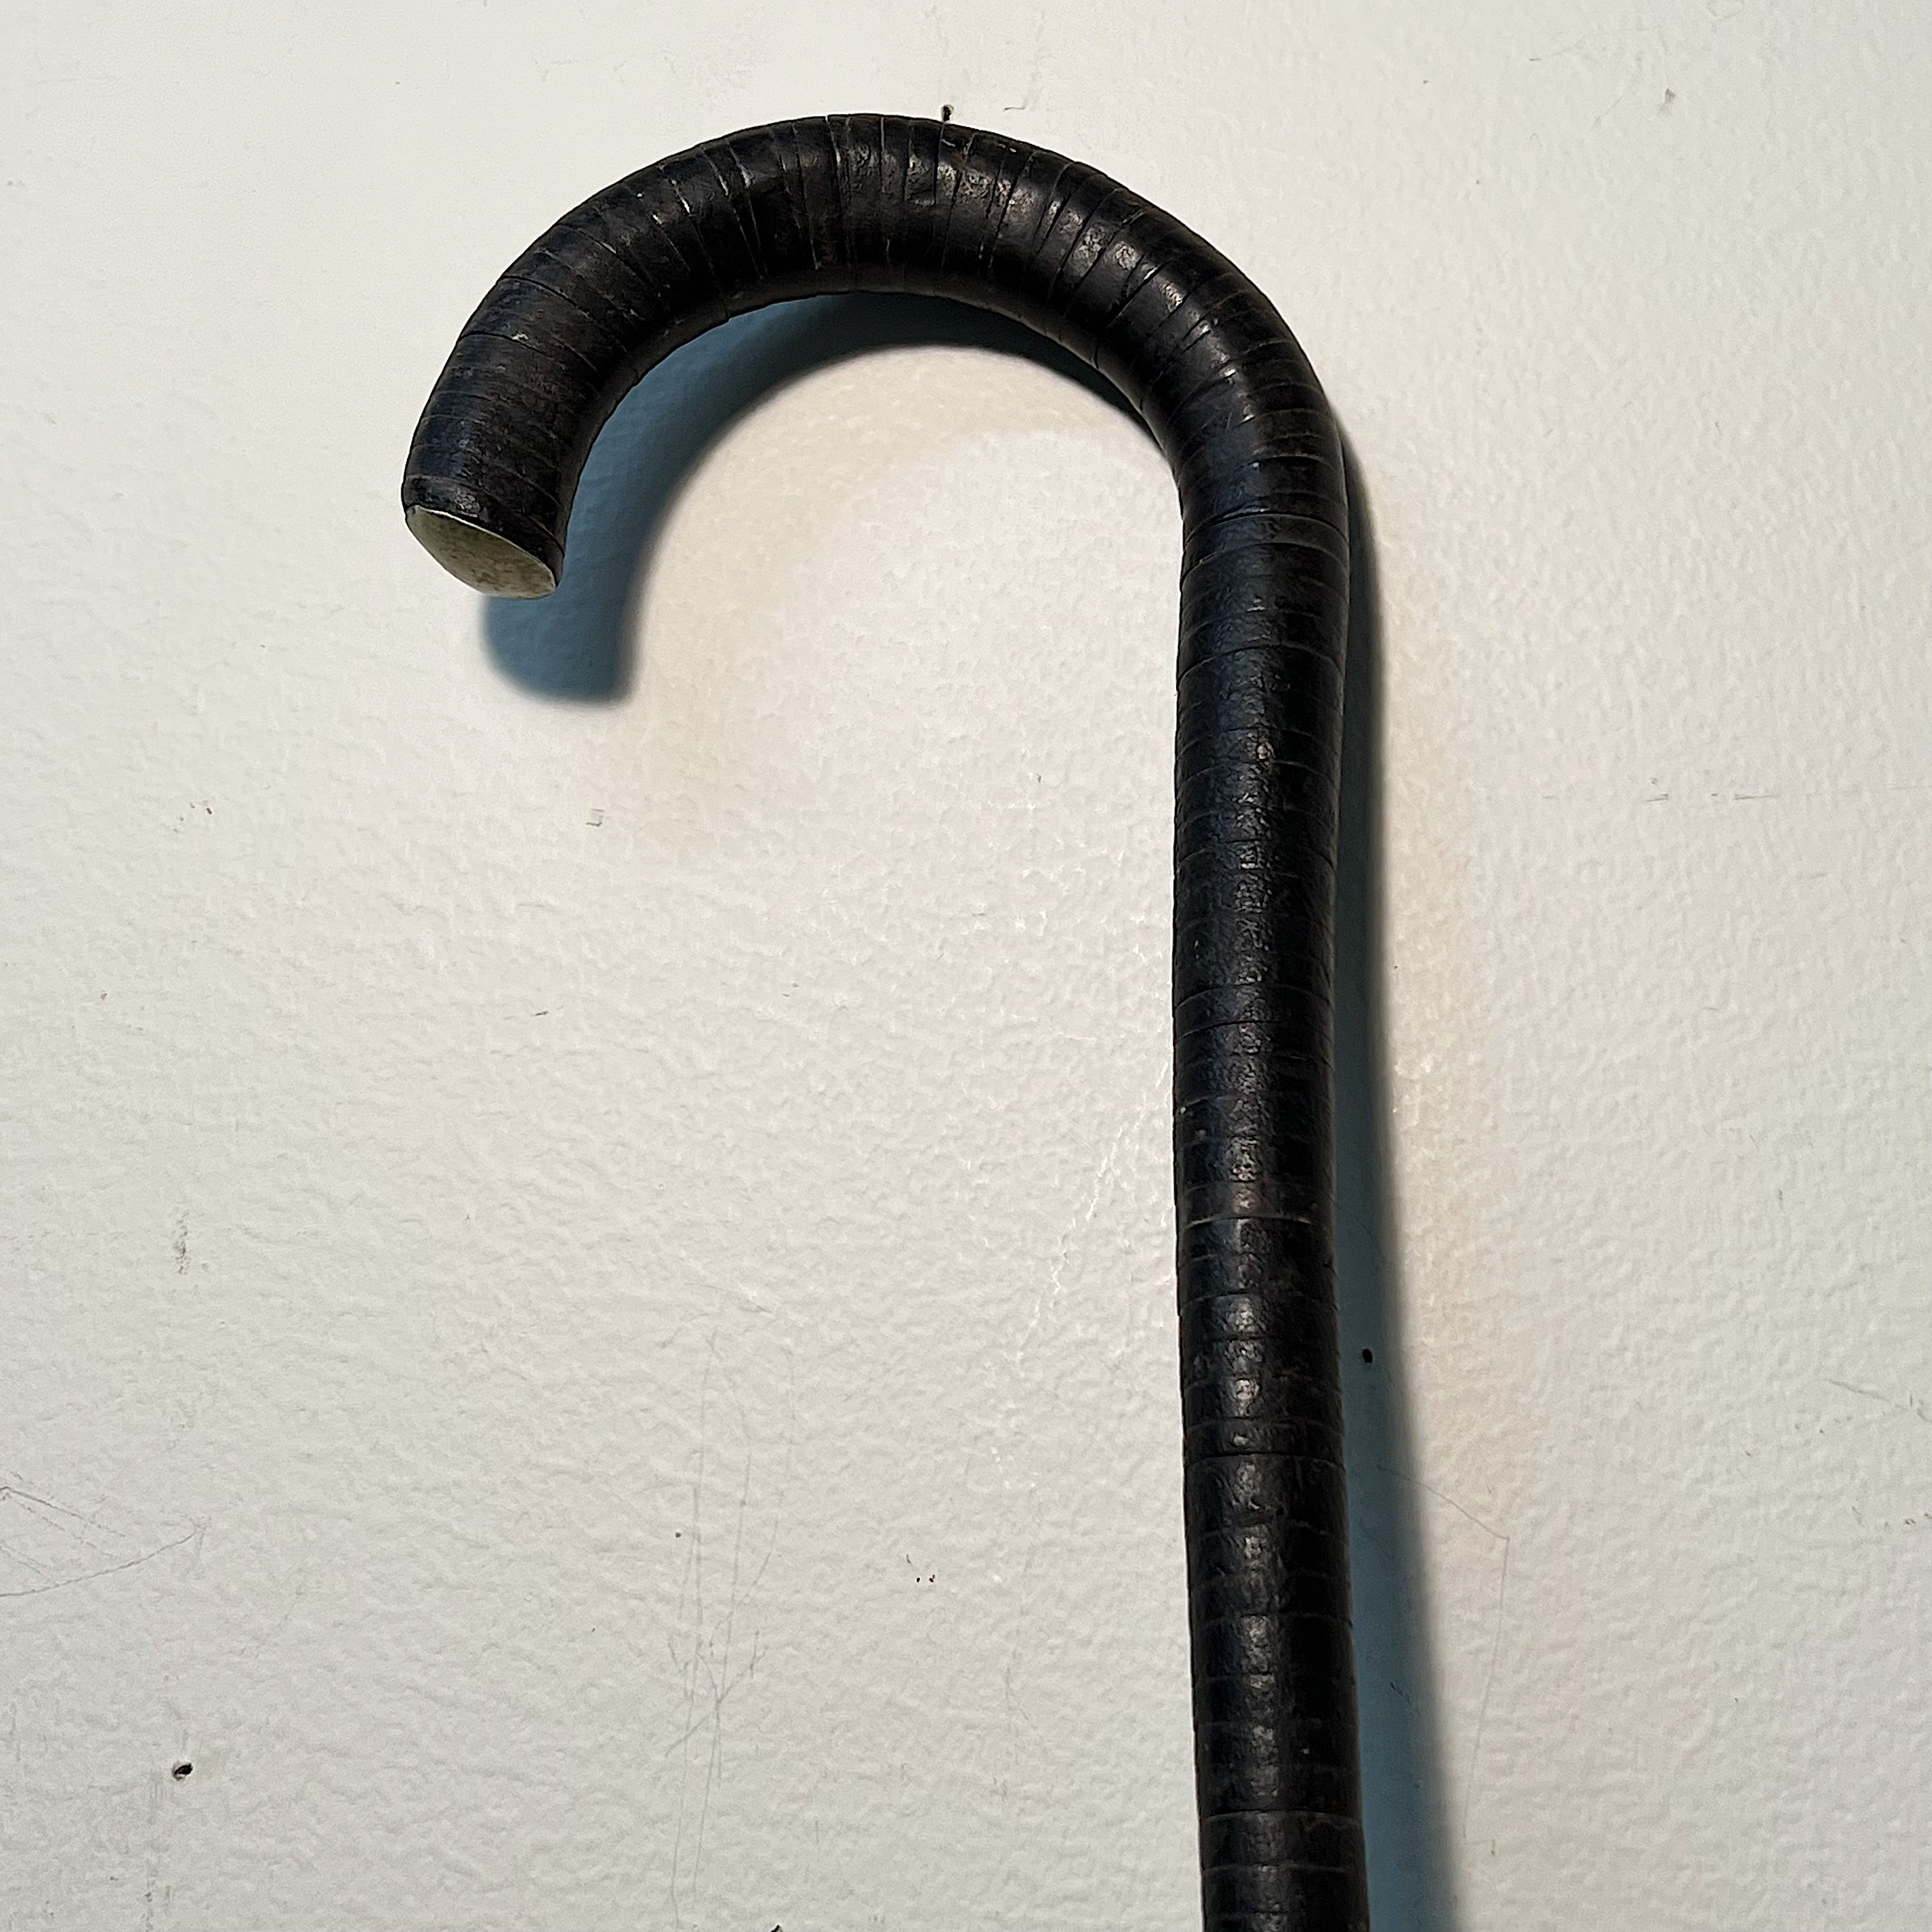 Rare Antique Stacked Black Leather Cane with Rare Silver Thumb Cap - Vintage Folk Art Walking Stick - Rare Unusual 19th Century Accessory